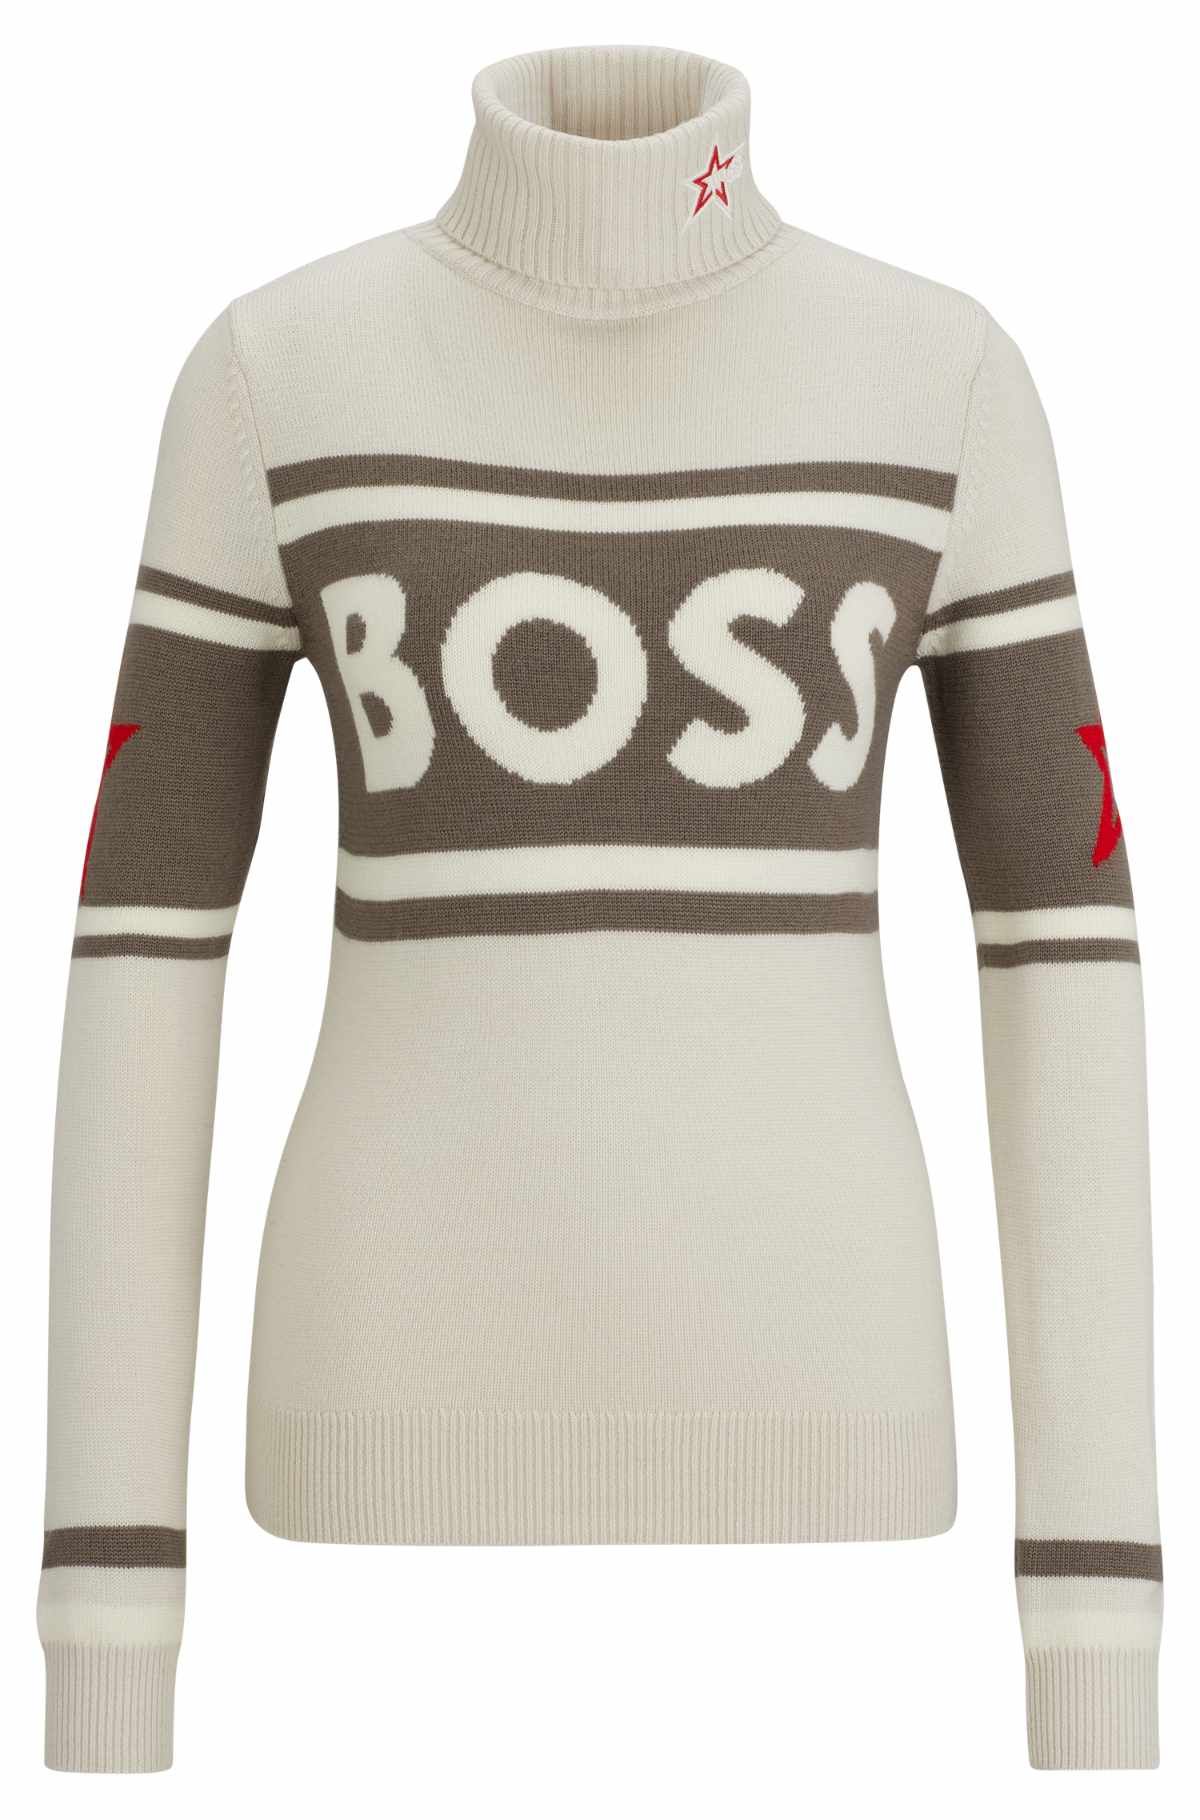 BOSS Returns To The Slopes With The Launch Of BOSS X Perfect Moment Capsule